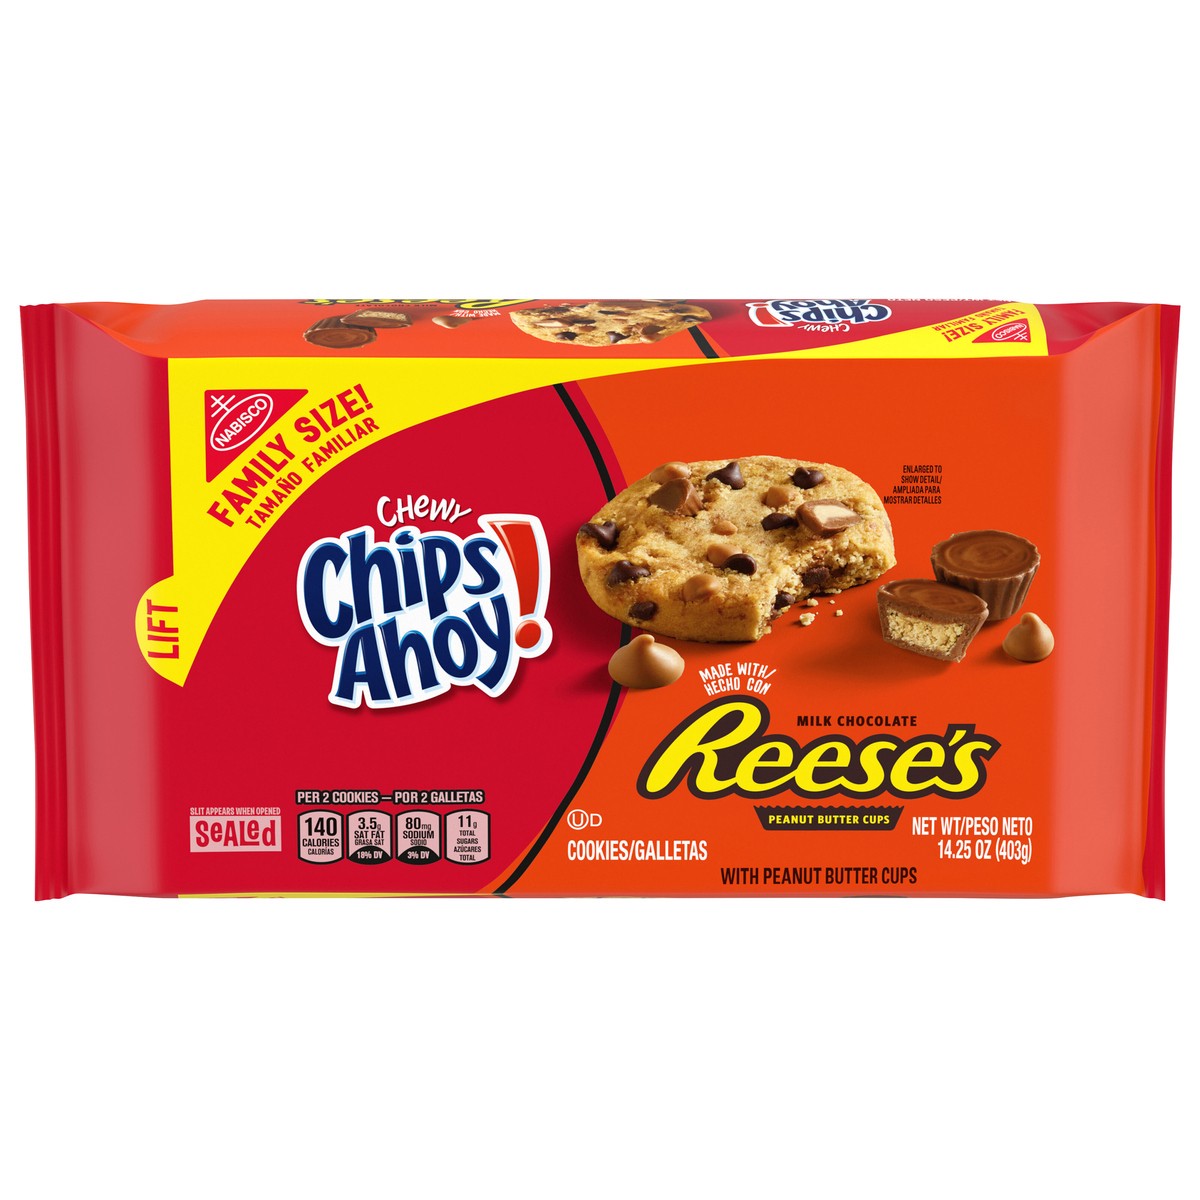 slide 7 of 15, CHIPS AHOY! Chewy Chocolate Chip Cookies with Reese's Peanut Butter Cups, Family Size, 14.25 oz, 14.25 oz